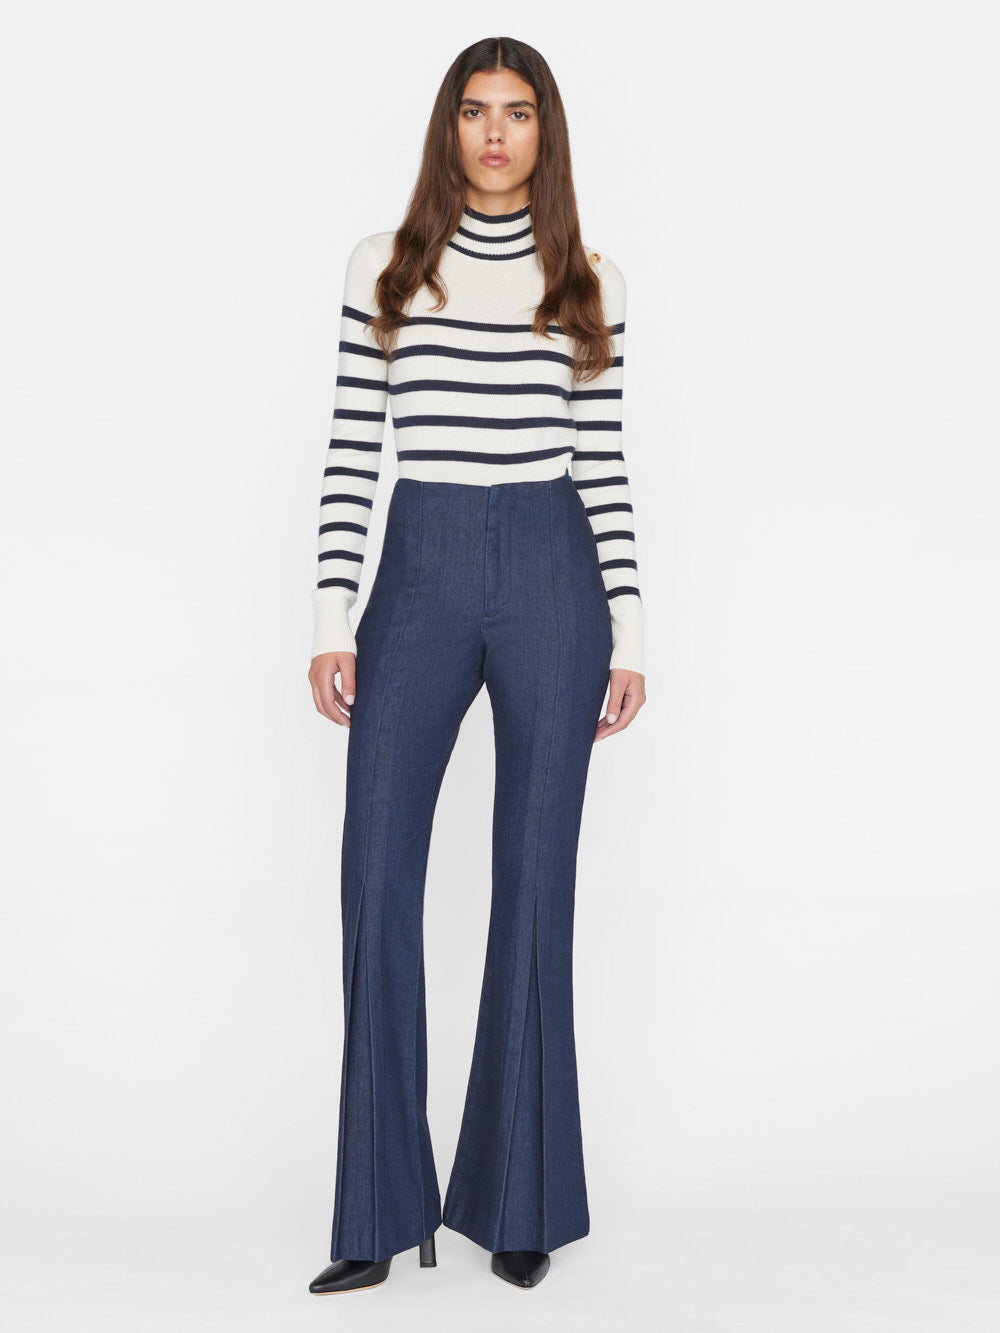 Pleated Denim Pant by Frame